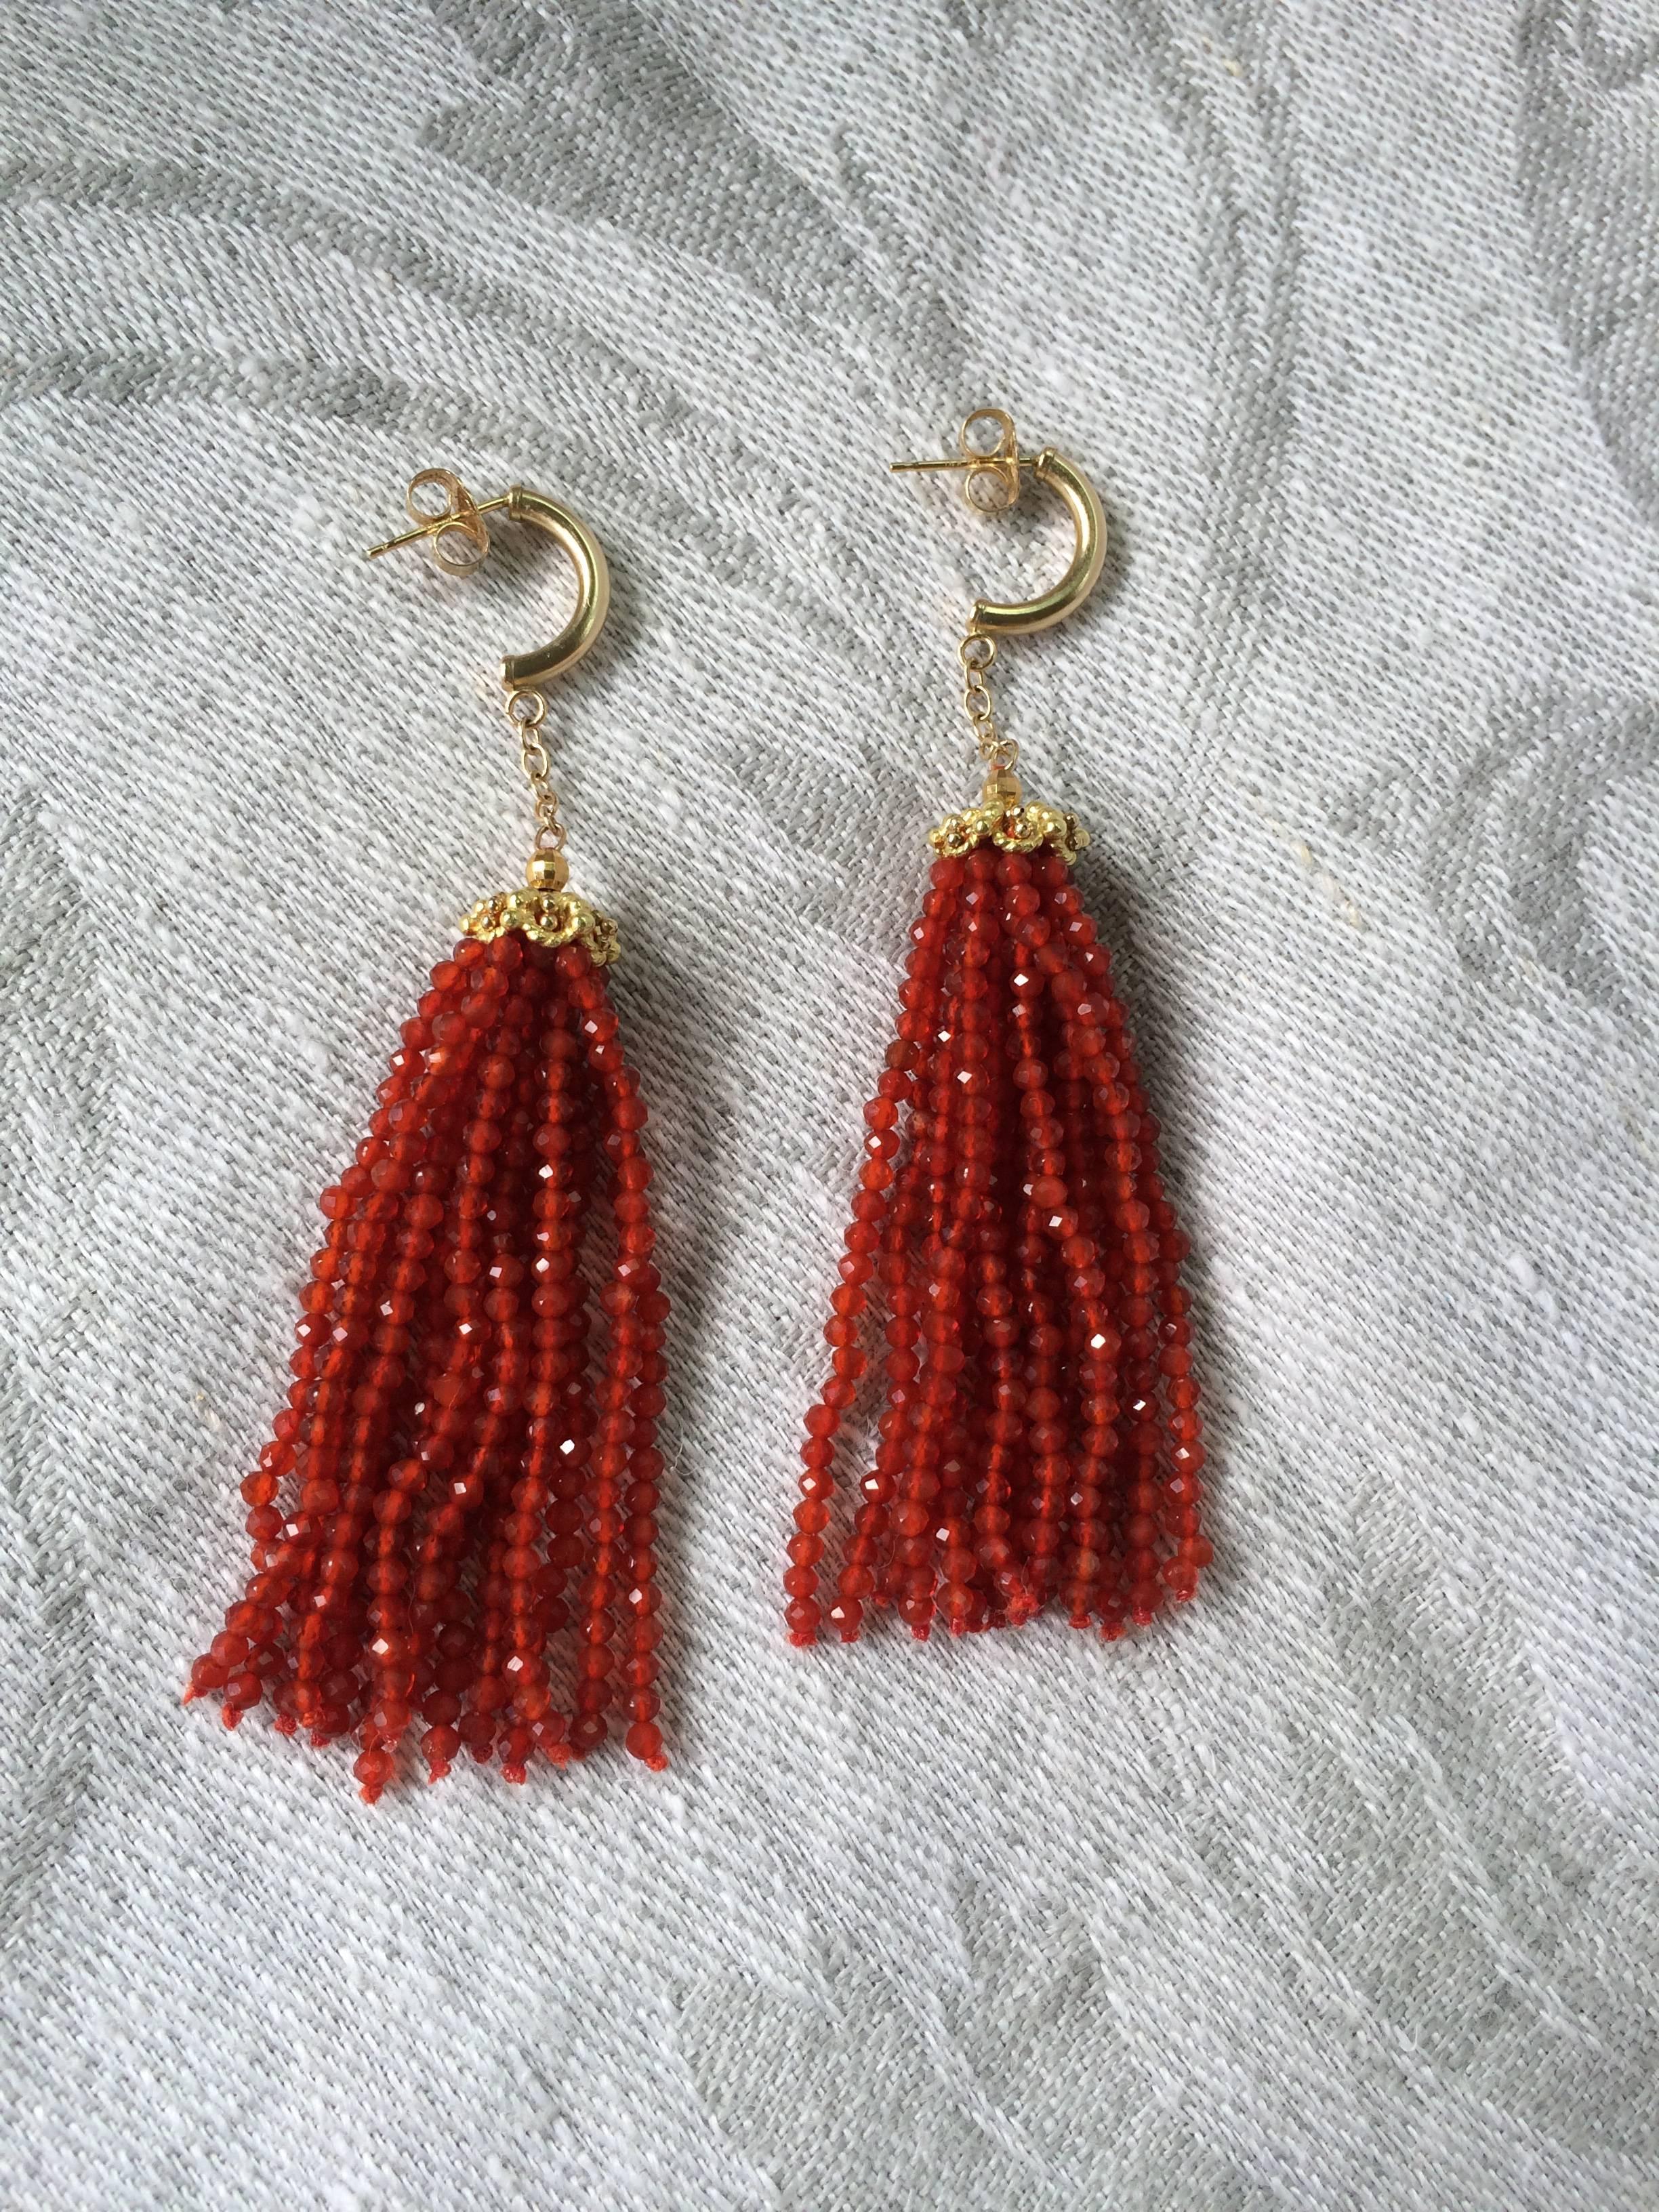 Very fine ( in size and quality) faceted carnelian beads are grouped together into tassels and dangle from a 14 k yellow gold filigree cap. Suspended from a gold chain, the earrings move and dance with every step. Fun, yet refined. Great for